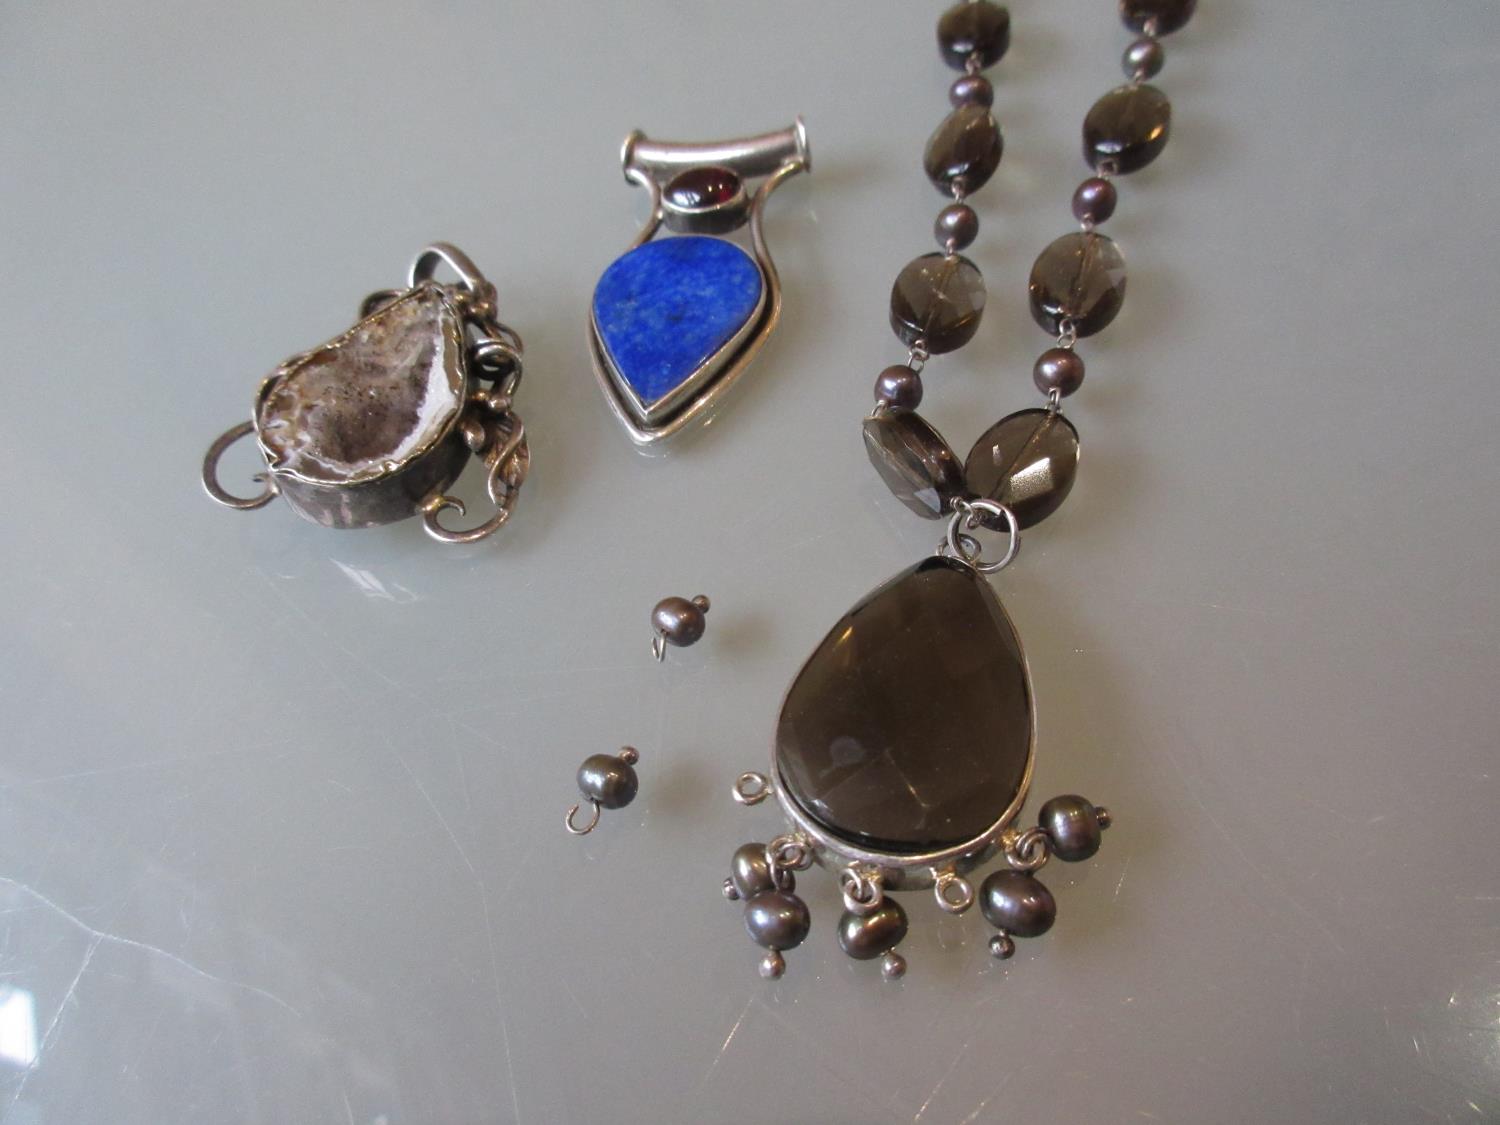 Two large pendants and a large silver necklace